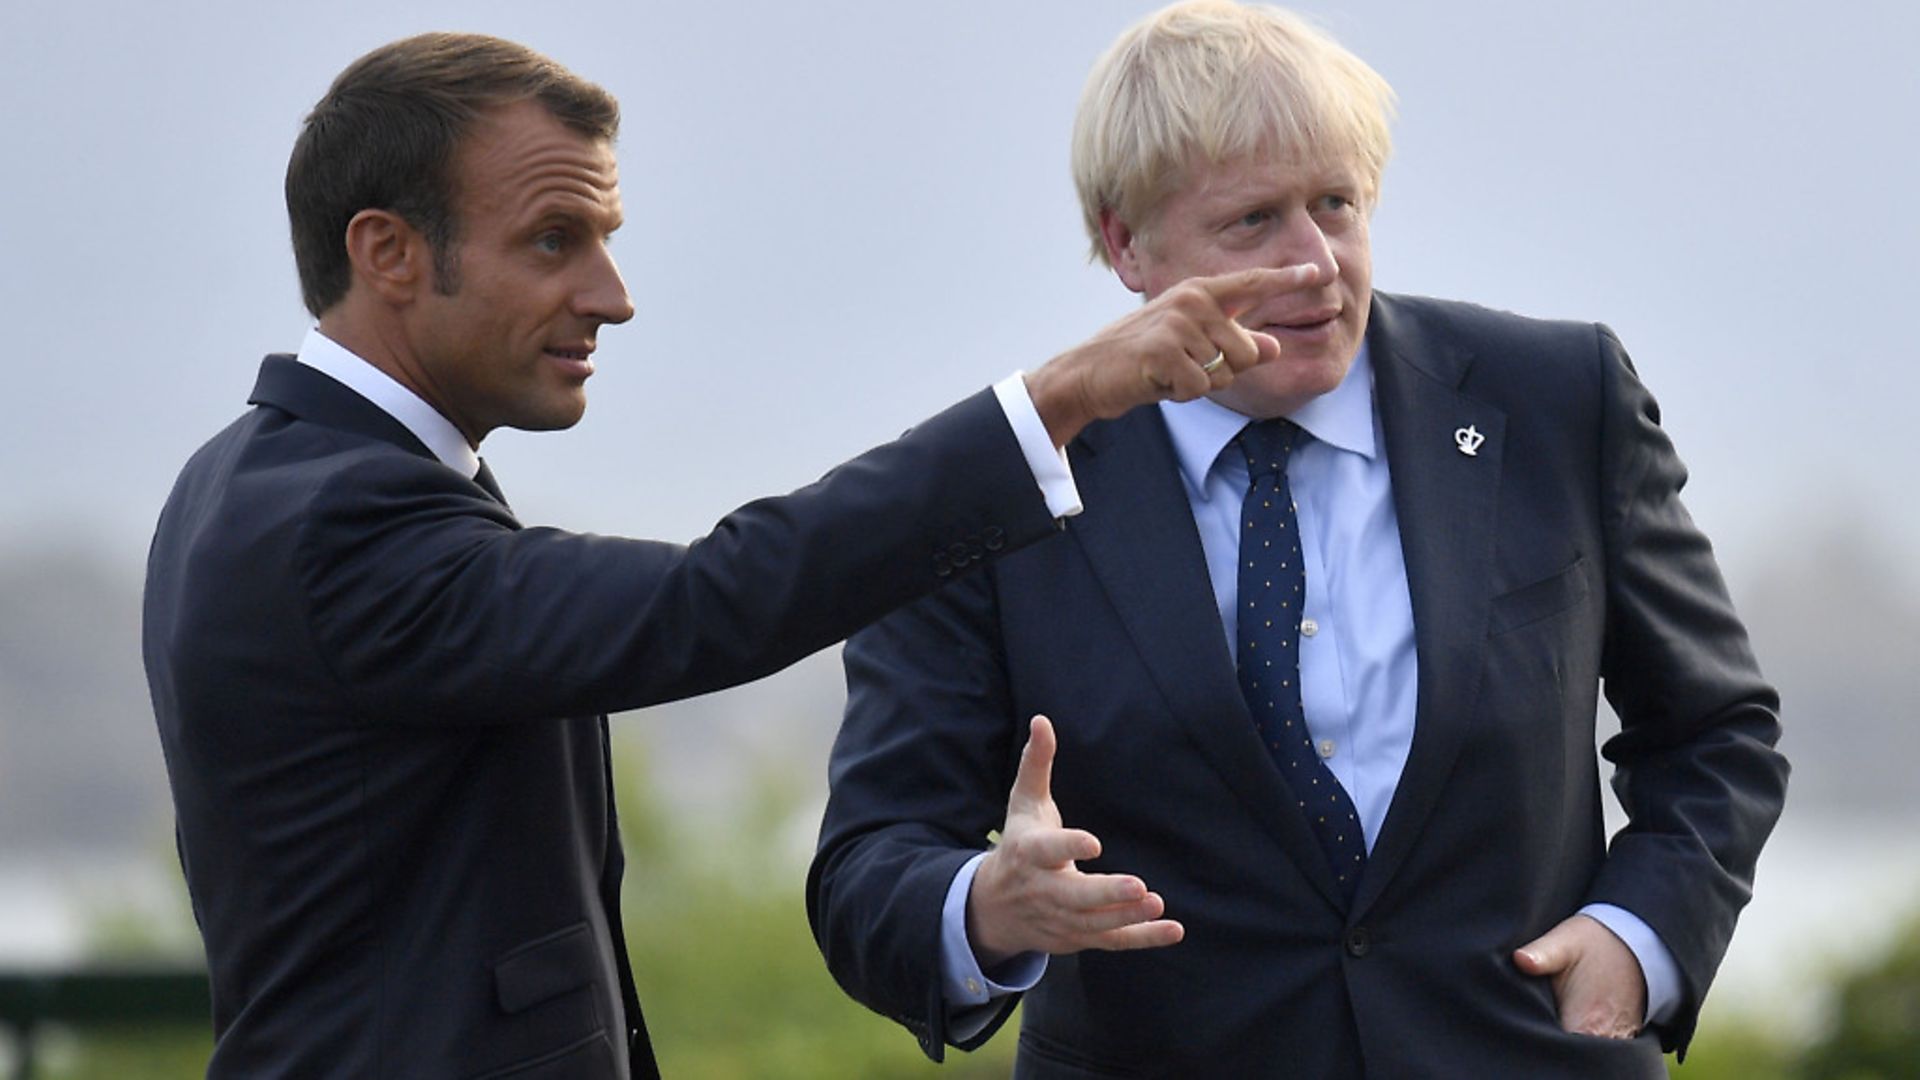 French president Emmanuel Macron speaks to British prime minister Boris Johnson. Photograph: Neil Hall/PA. - Credit: PA Wire/PA Images